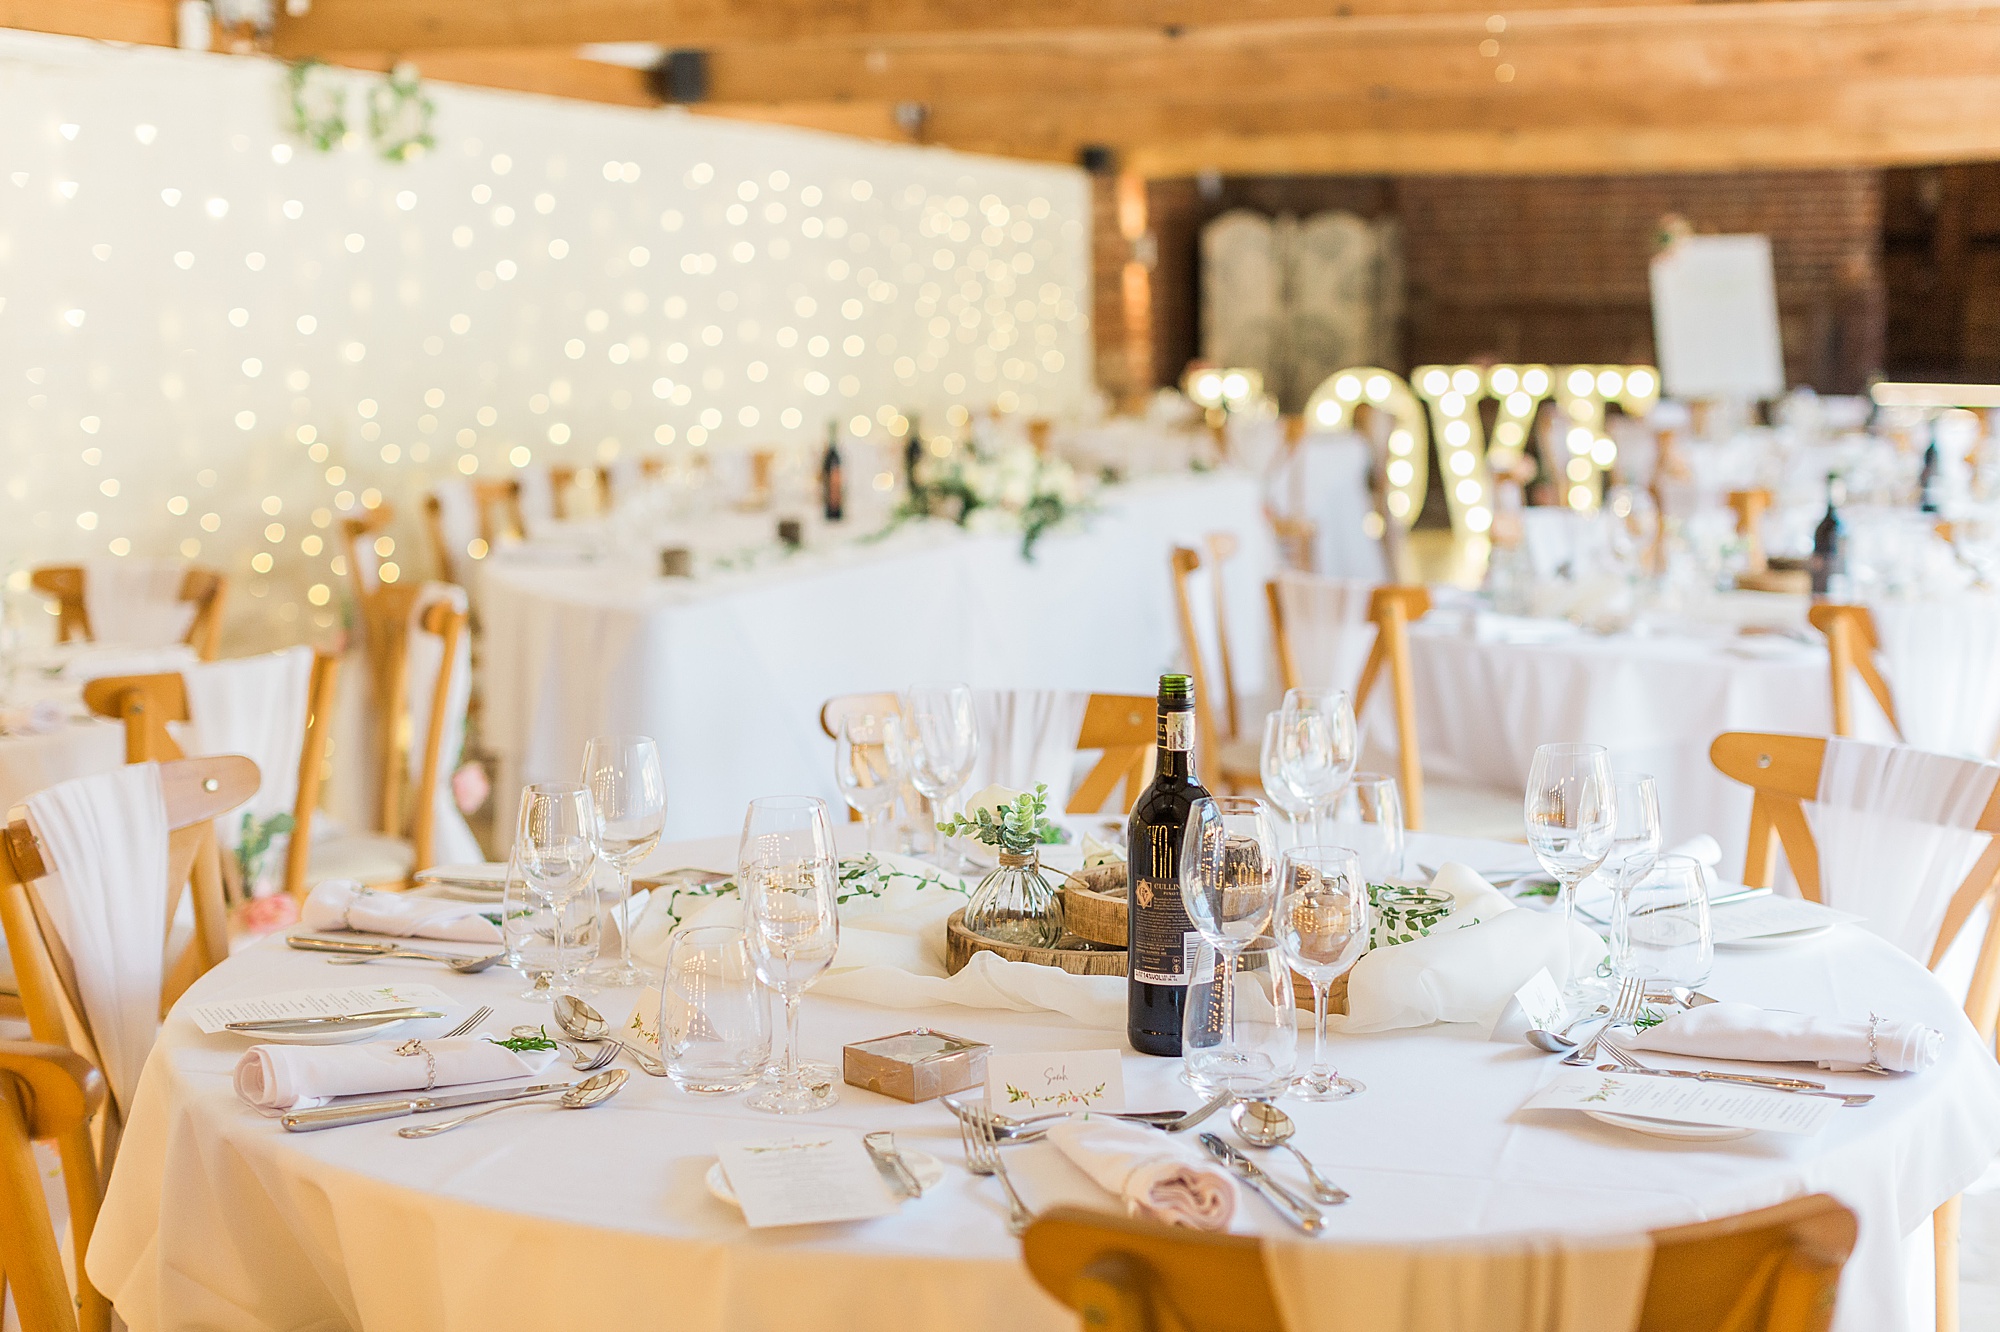 photo of a wedding reception styled beautifully in the barley barn at curradine barns image shows a wall of fairy lights and light up love letters behind simply decorate tables 